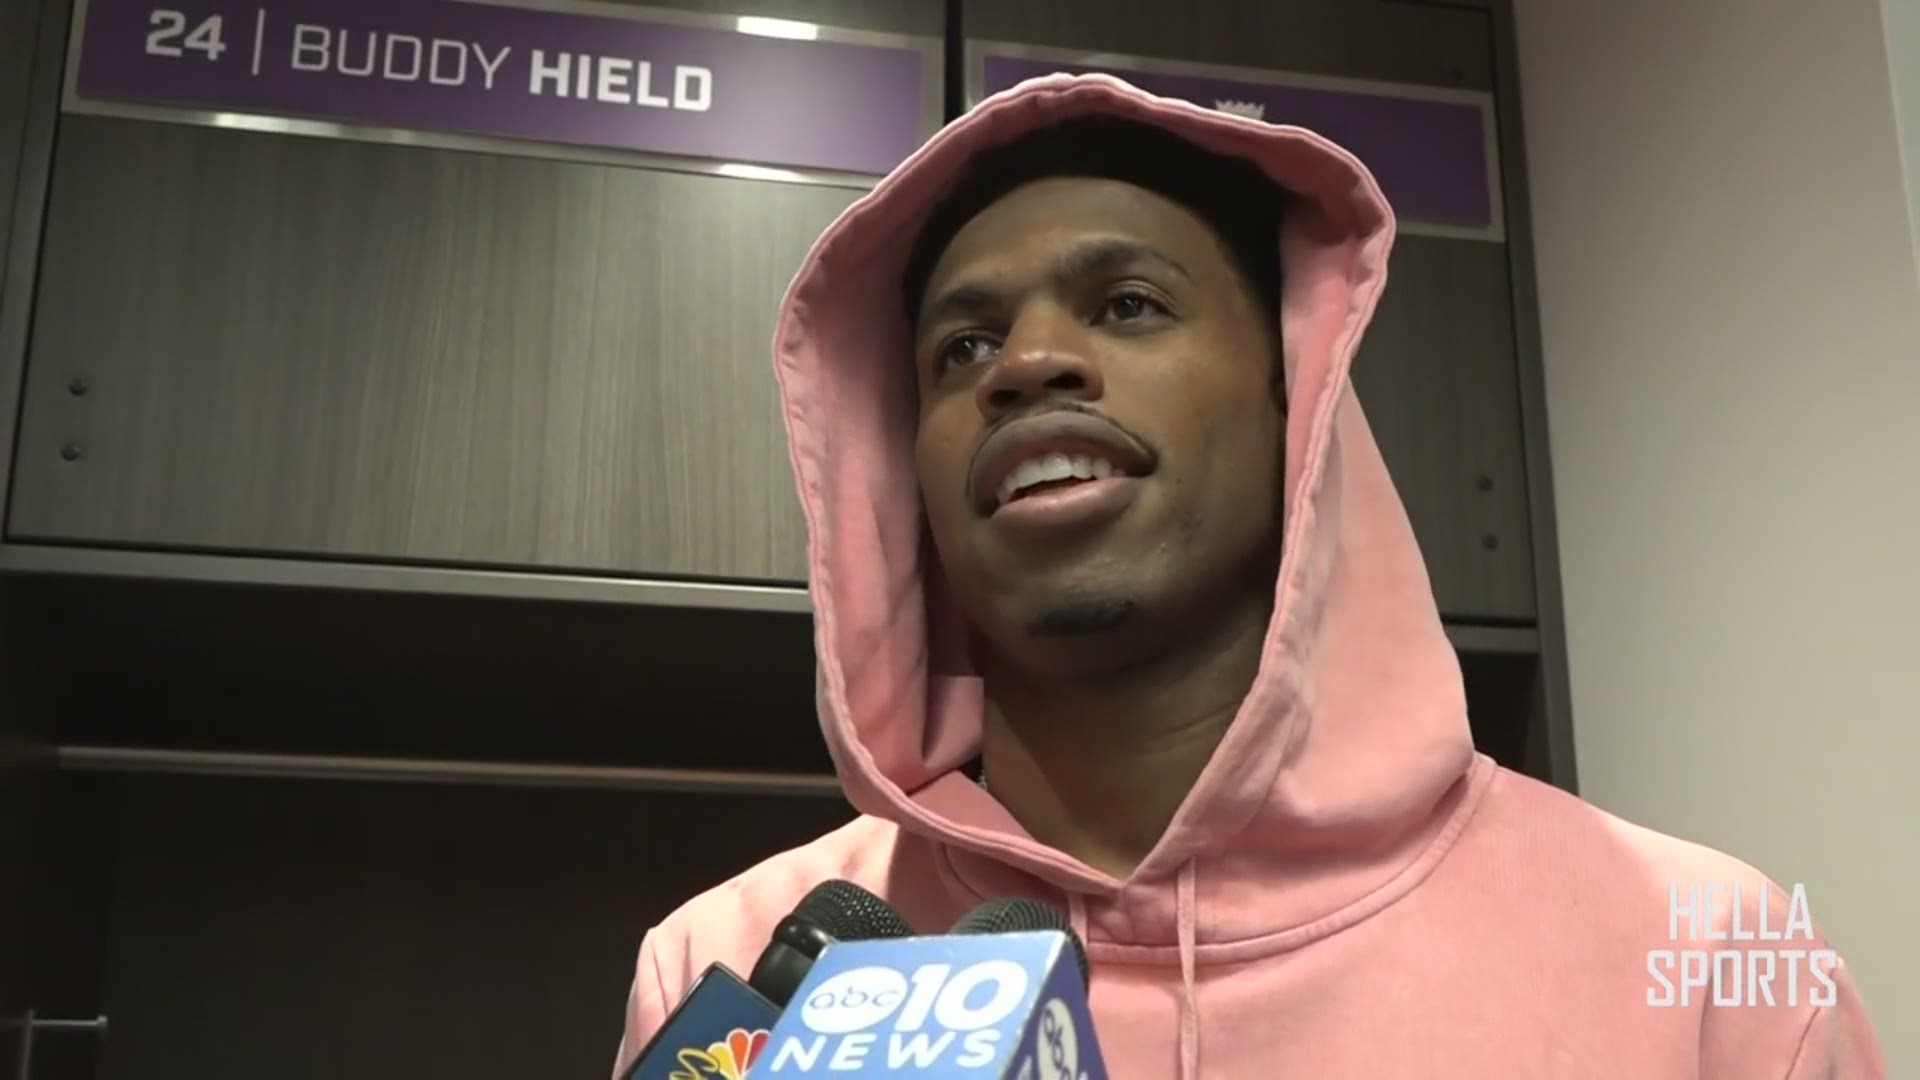 Kings SG Buddy Hield talks about Friday’s 127-106 loss to the Milwaukee Bucks & Sacramento’s strategy to try to slow Giannis Antetokounmpo, only have others step up.